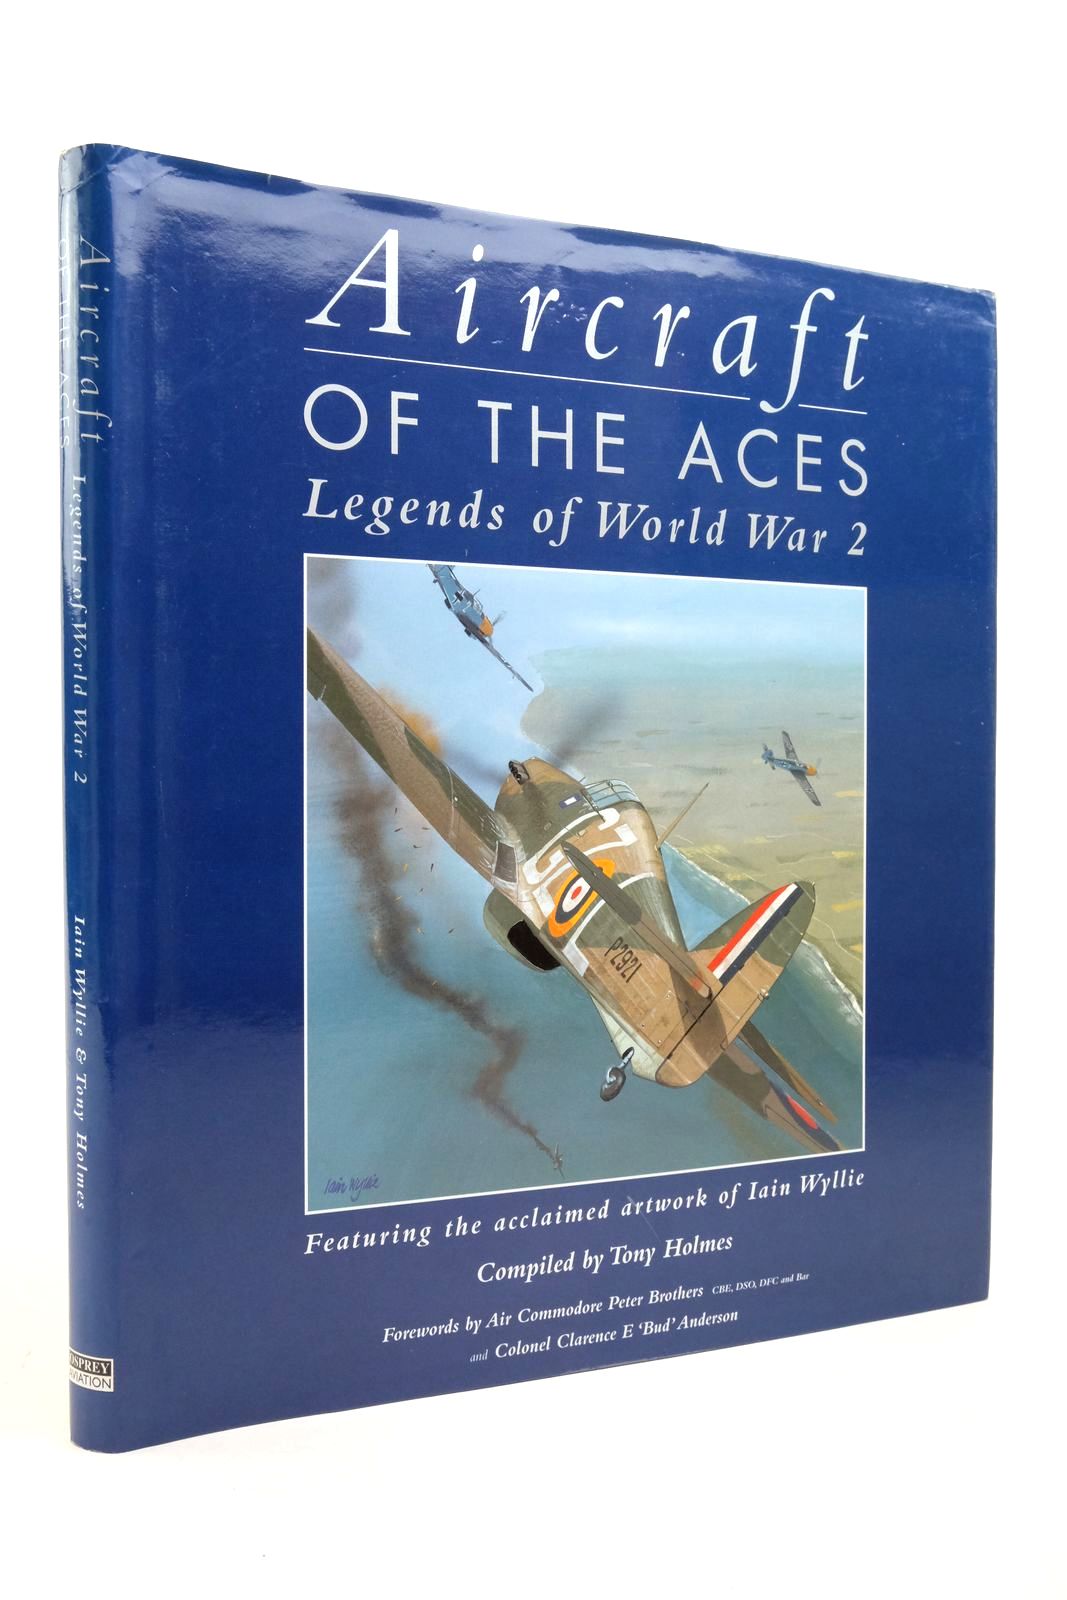 Photo of AIRCRAFT OF THE ACES LEGENDS OF WORLD WAR 2 FEATURING THE ACCLAIMED ARTWORK OF IAIN WYLLIE written by Holmes, Tony illustrated by Wyllie, Iain published by Osprey Aviation (STOCK CODE: 2138919)  for sale by Stella & Rose's Books